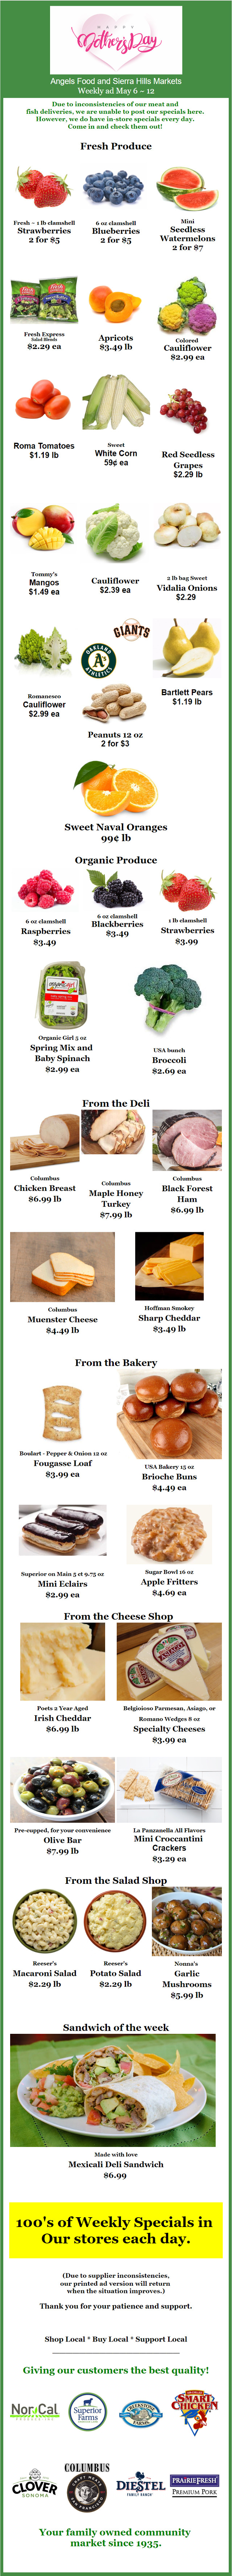 Angels Food and Sierra Hills Markets Weekly Ad & Specials Through May 12th